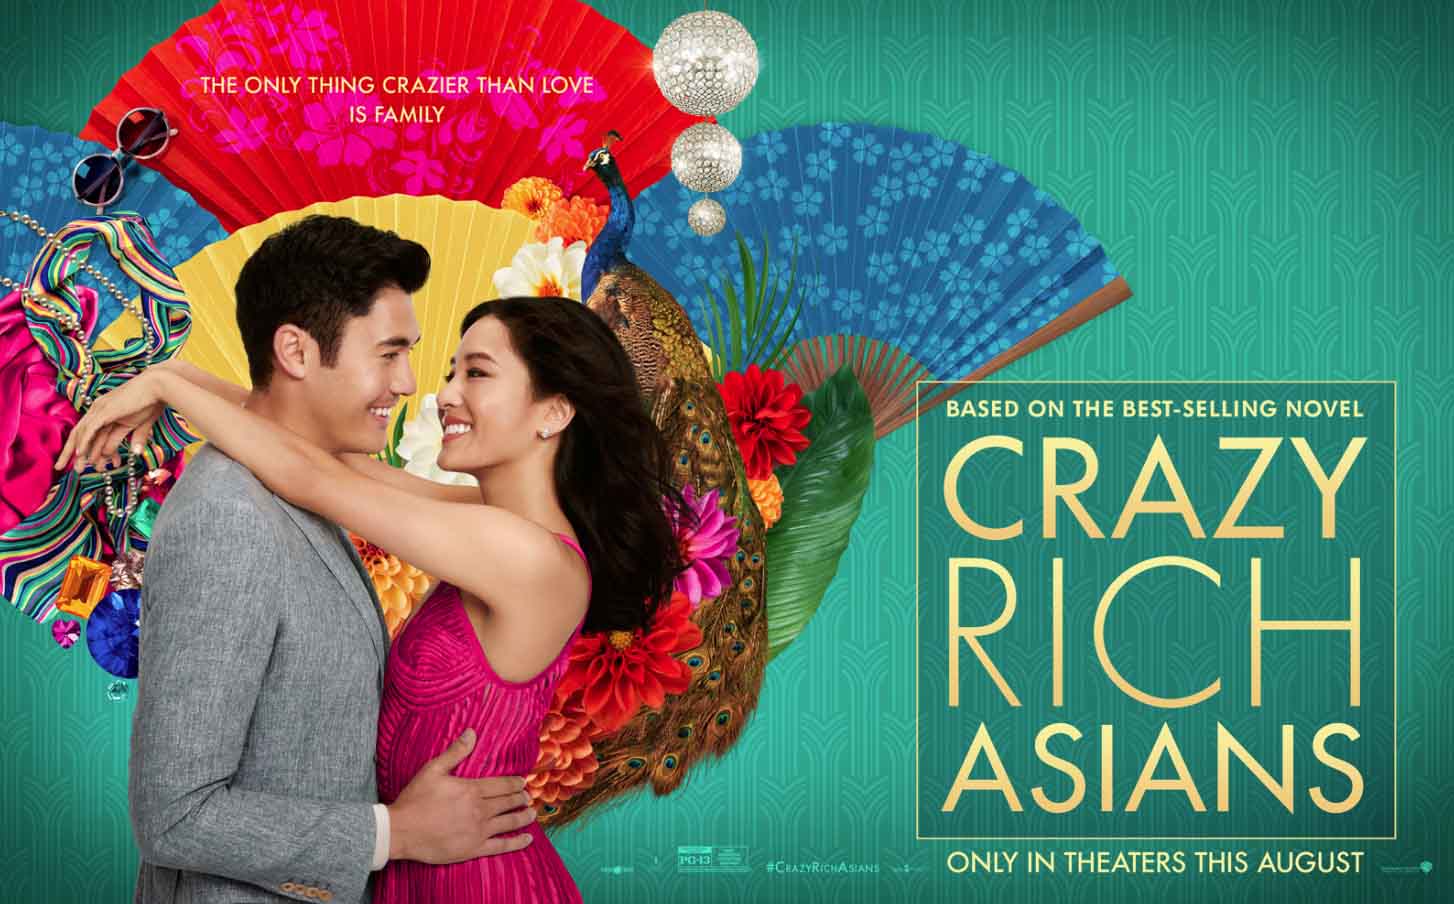 Updates! Congratulations - CRAZY RICH ASIANS is crossing the $100 Million mark for North American Box Office! 